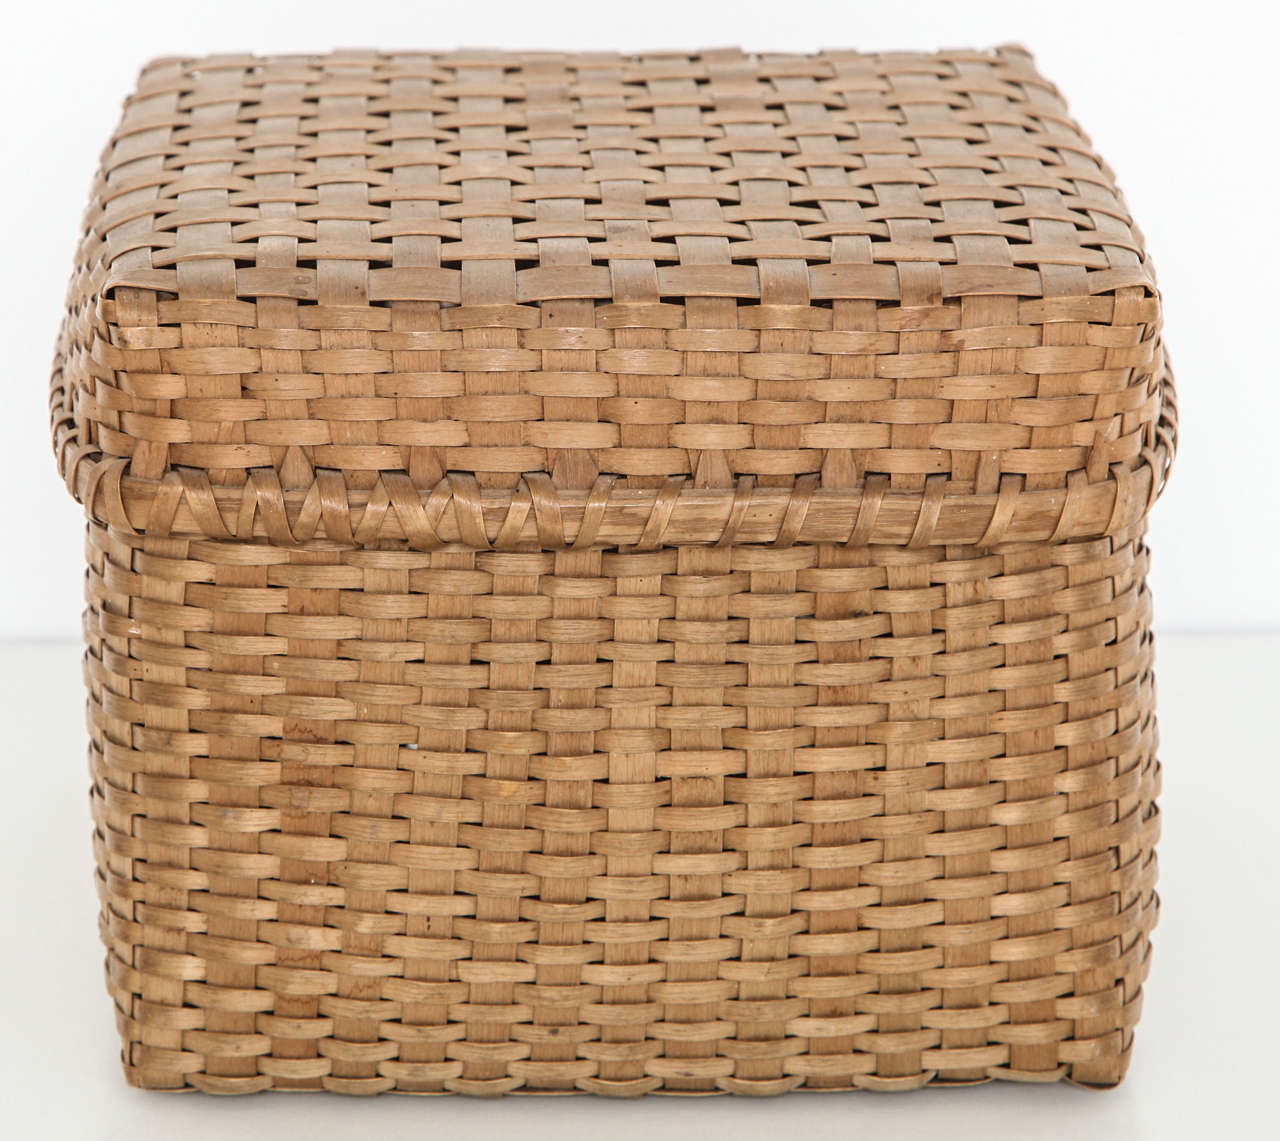 American Small Lidded Woven Basket, Late 19th c.